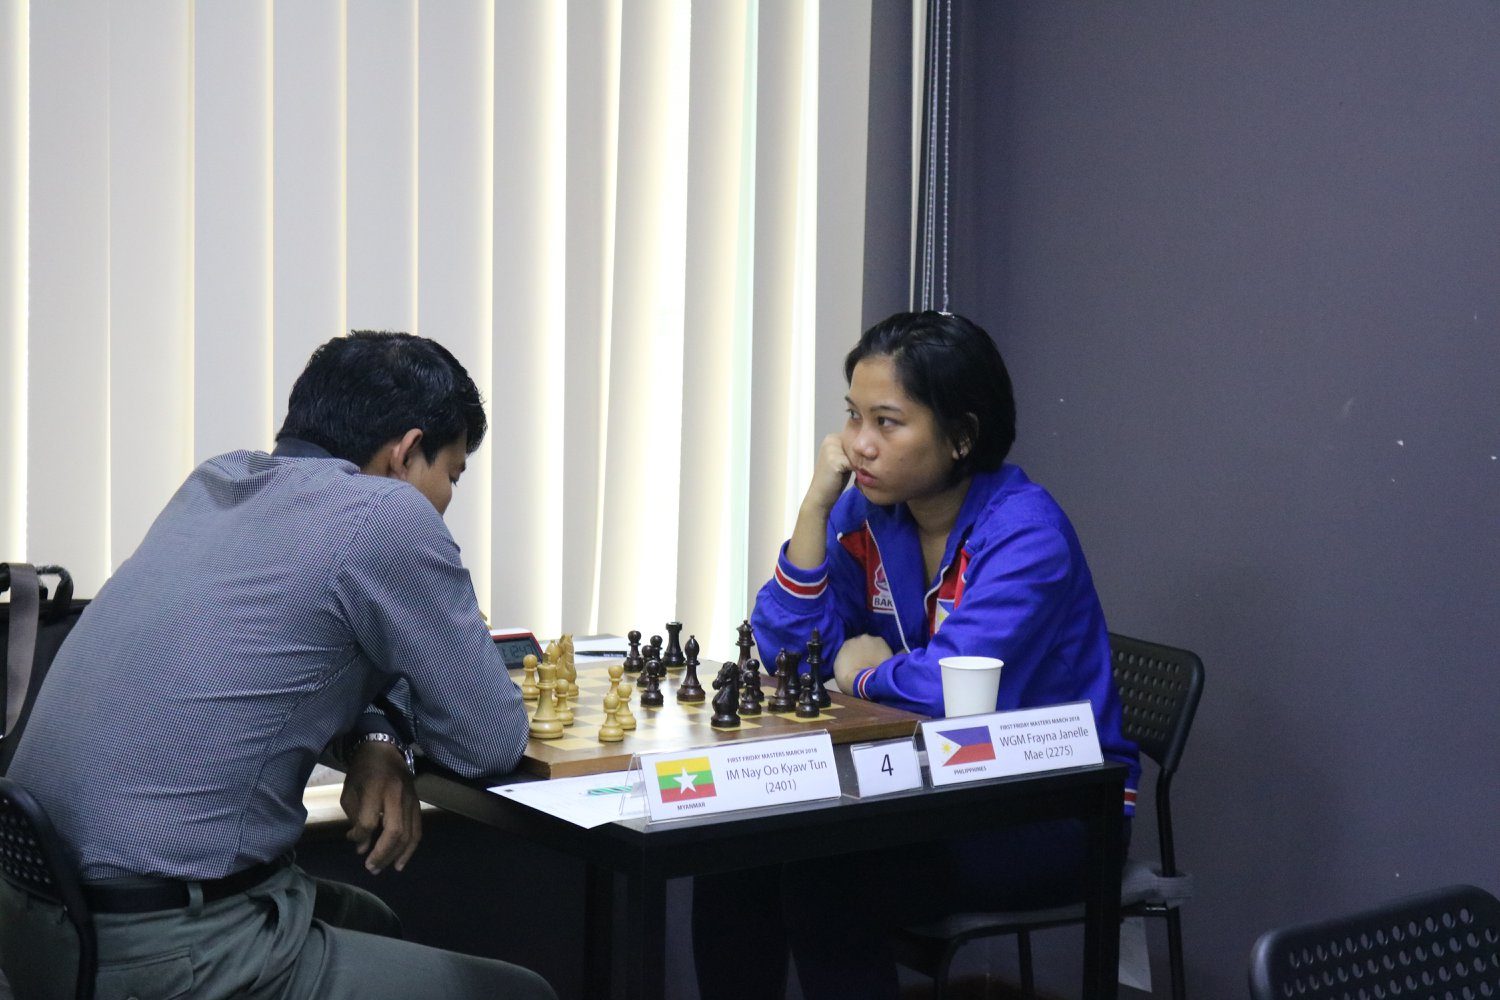 Janelle Mae Frayna ends up 4th in Malaysia after costly final round draw